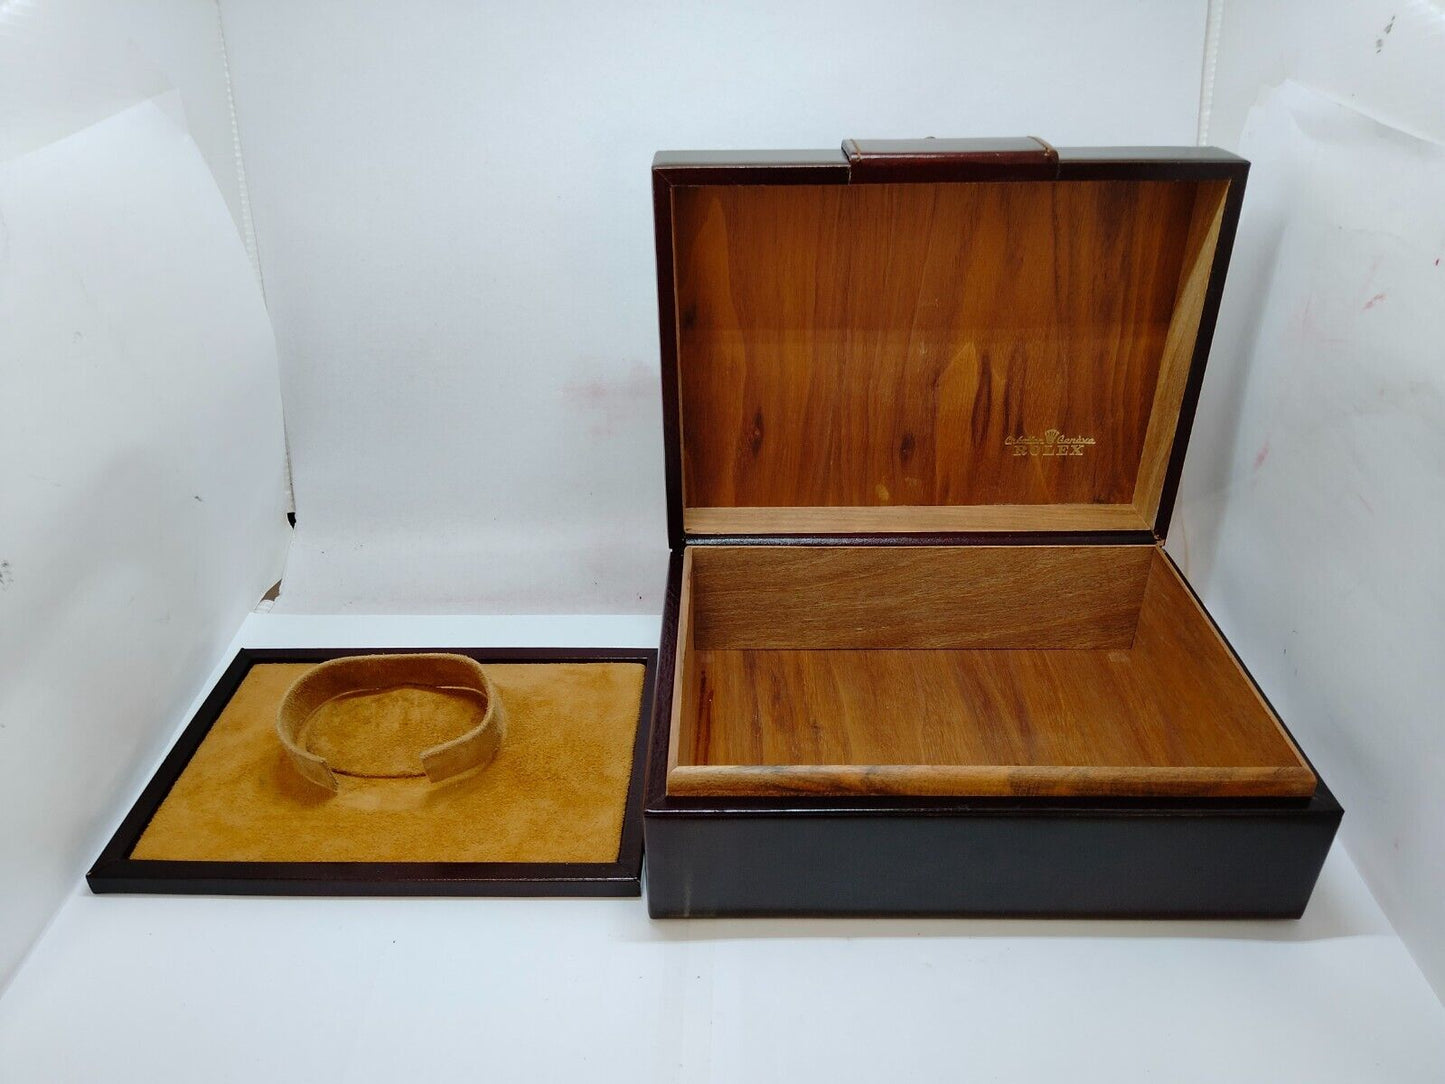 GENUINE ROLEX Day-Date Brown watch box case 71.00.04 wood leather 1005003yS